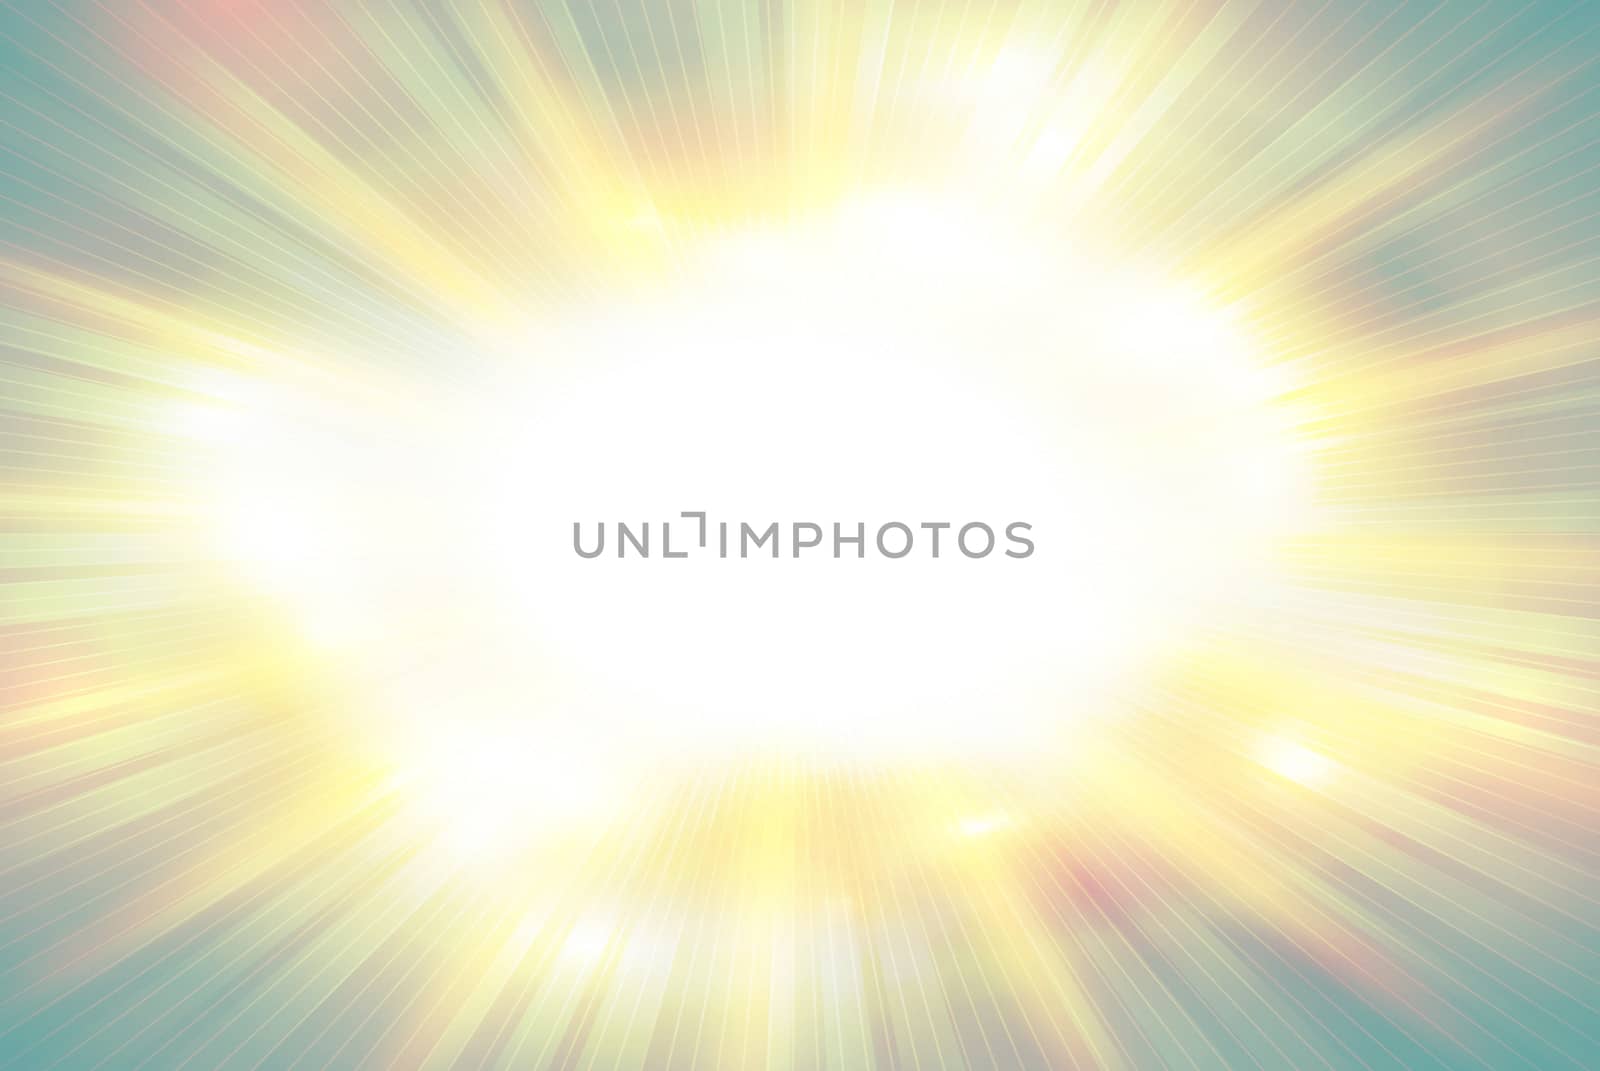 Abstract background with white light in center, concept illustration